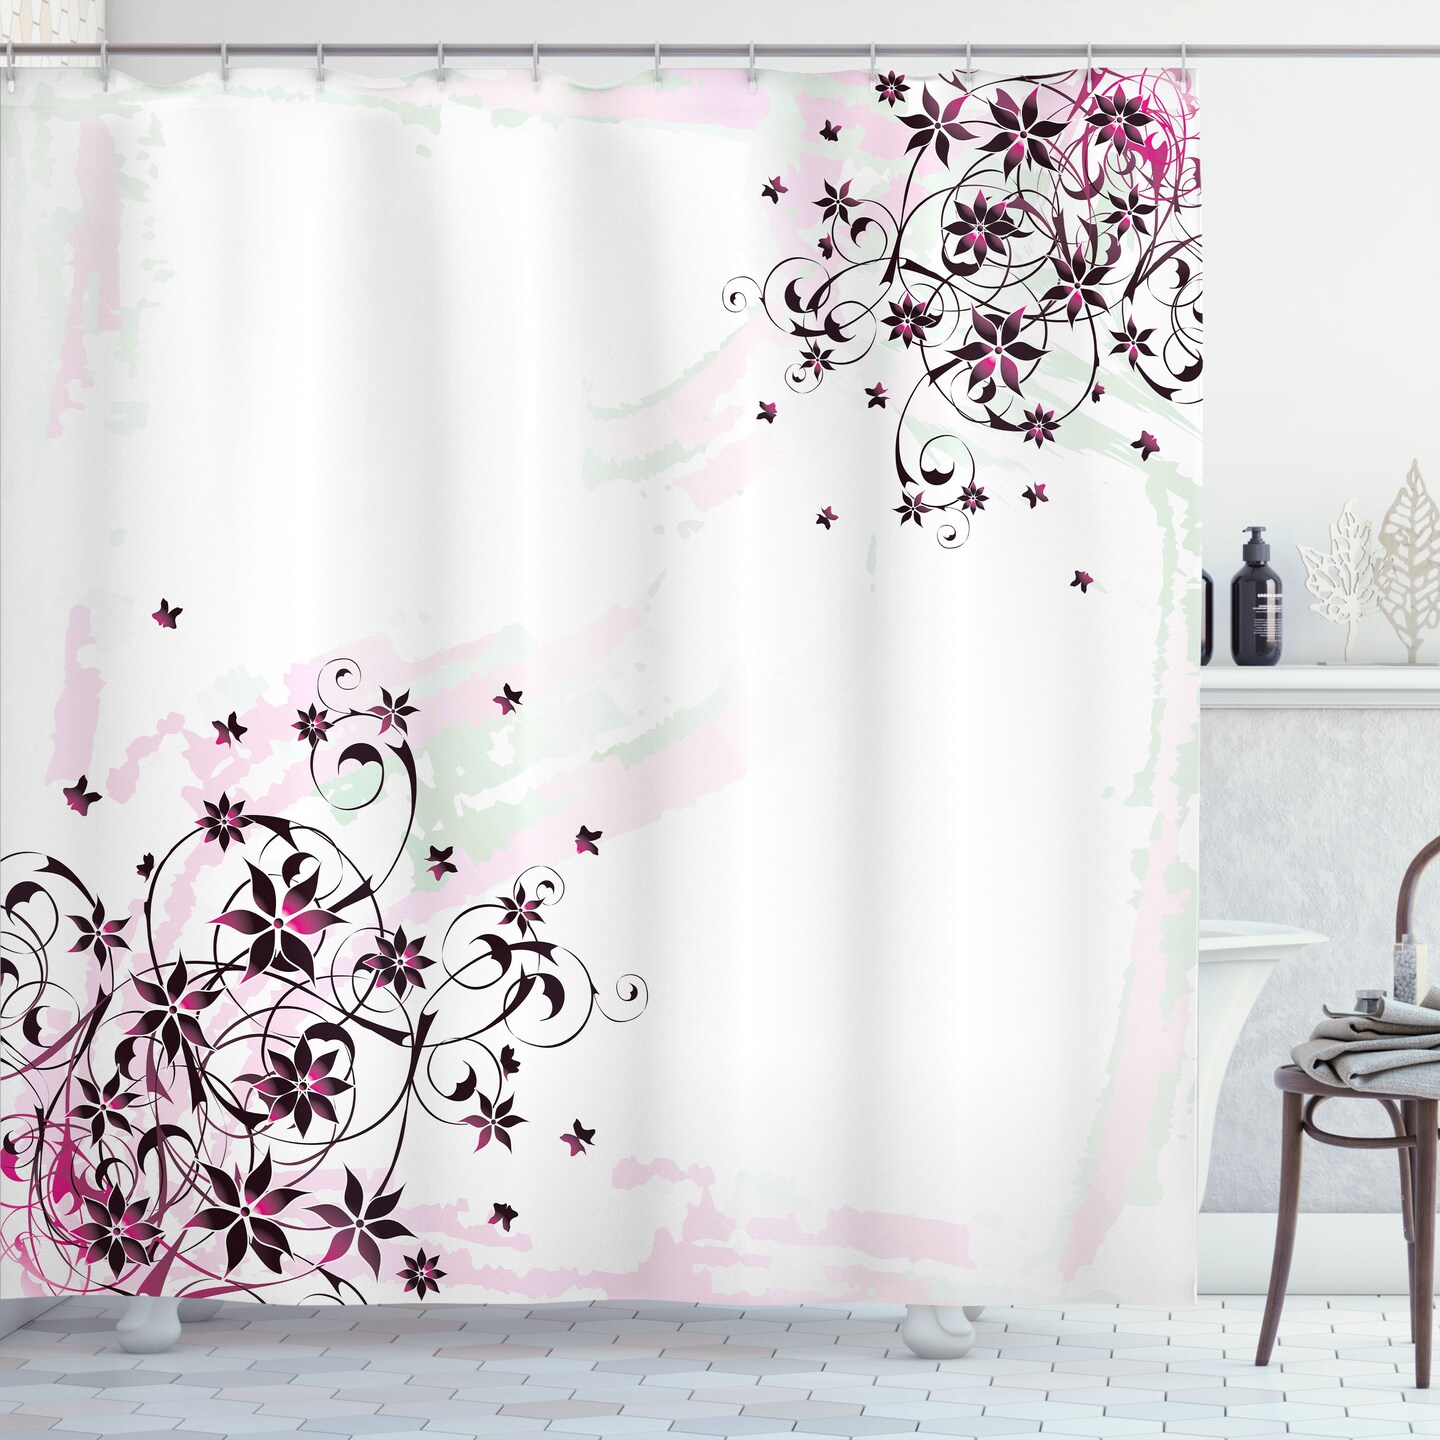 Ambesonne Floral Shower Curtain, Grunge Flower Motif with Swirled Leaves  Florets Paintbrush Illustration, Cloth Fabric Bathroom Decor Set with Hooks,  69 W x 70 L, Black Pale Pink Mint